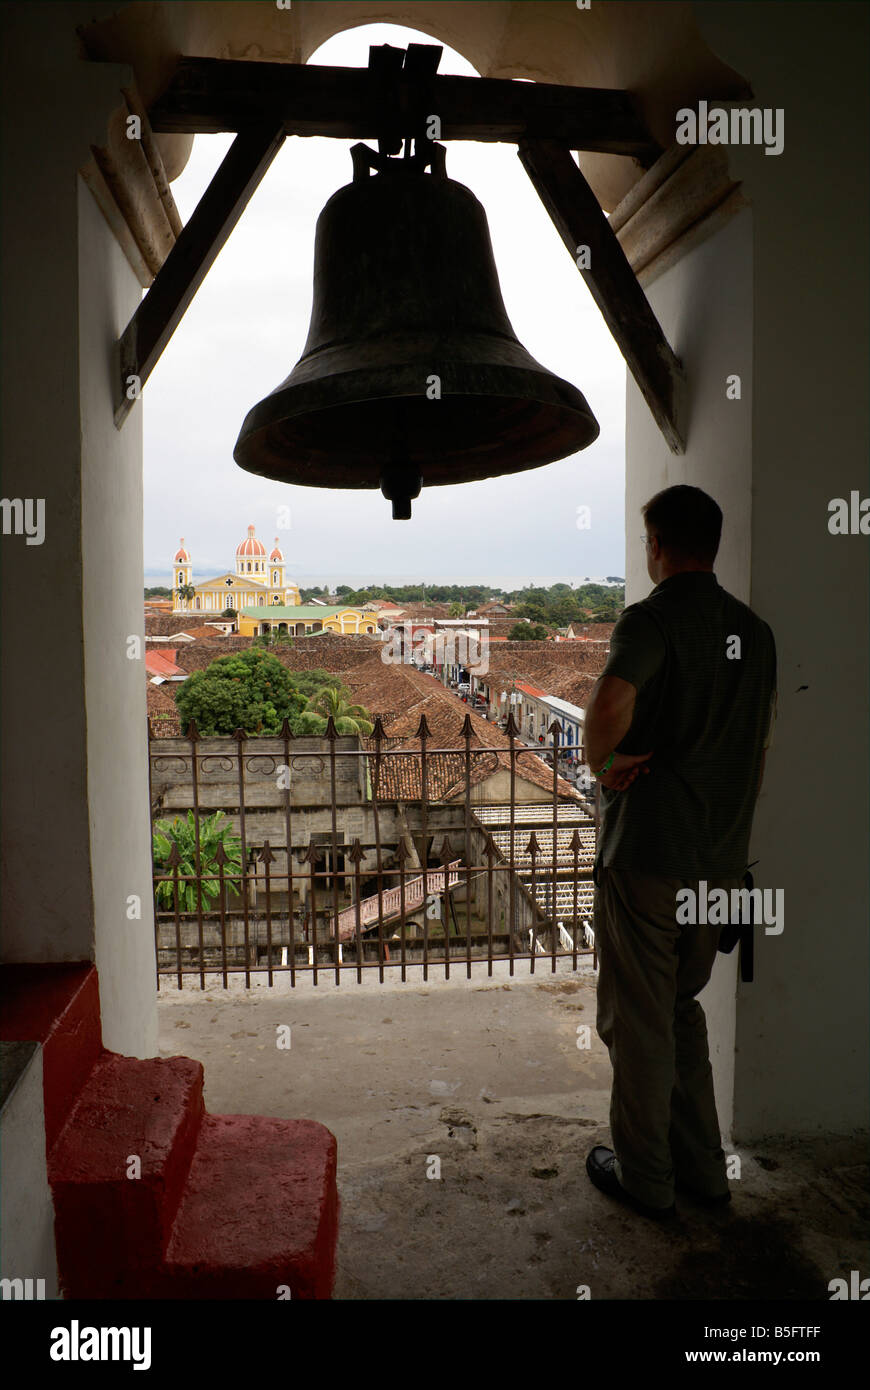 Tourist admiring the view of the Spanish colonial city of Granada from the bell tower of La Merced Church, Granada, Nicaragua Stock Photo